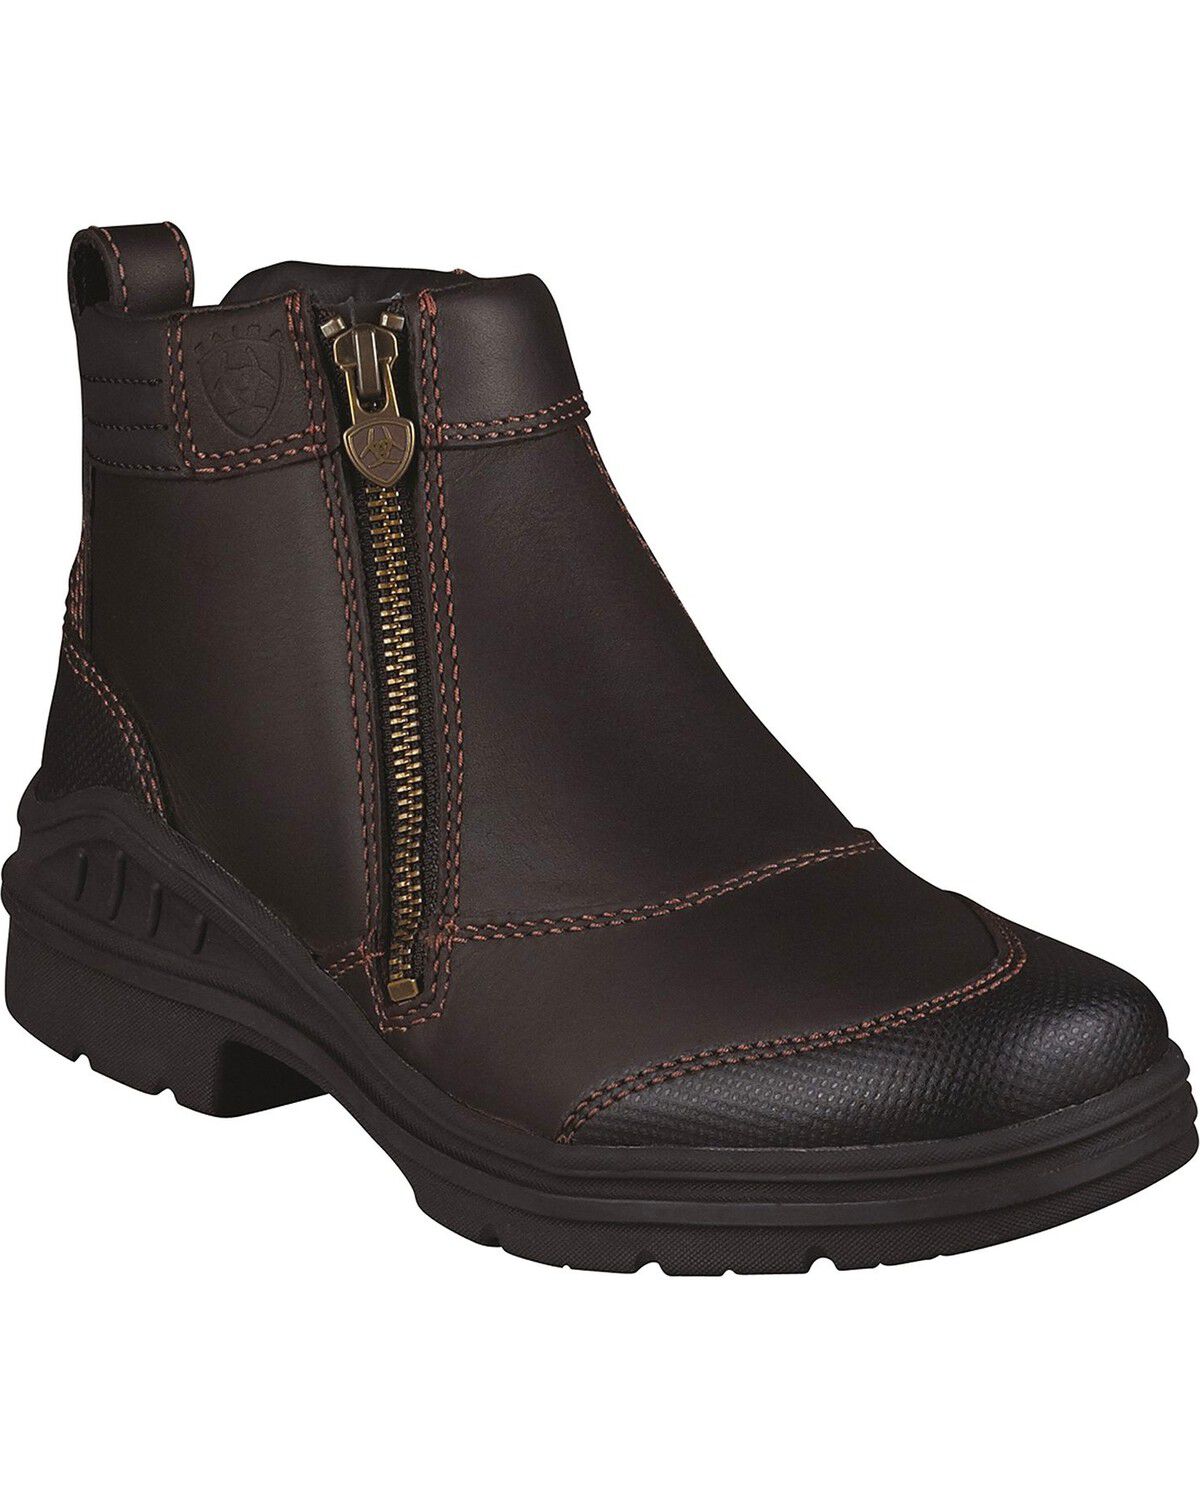 equestrian work boots